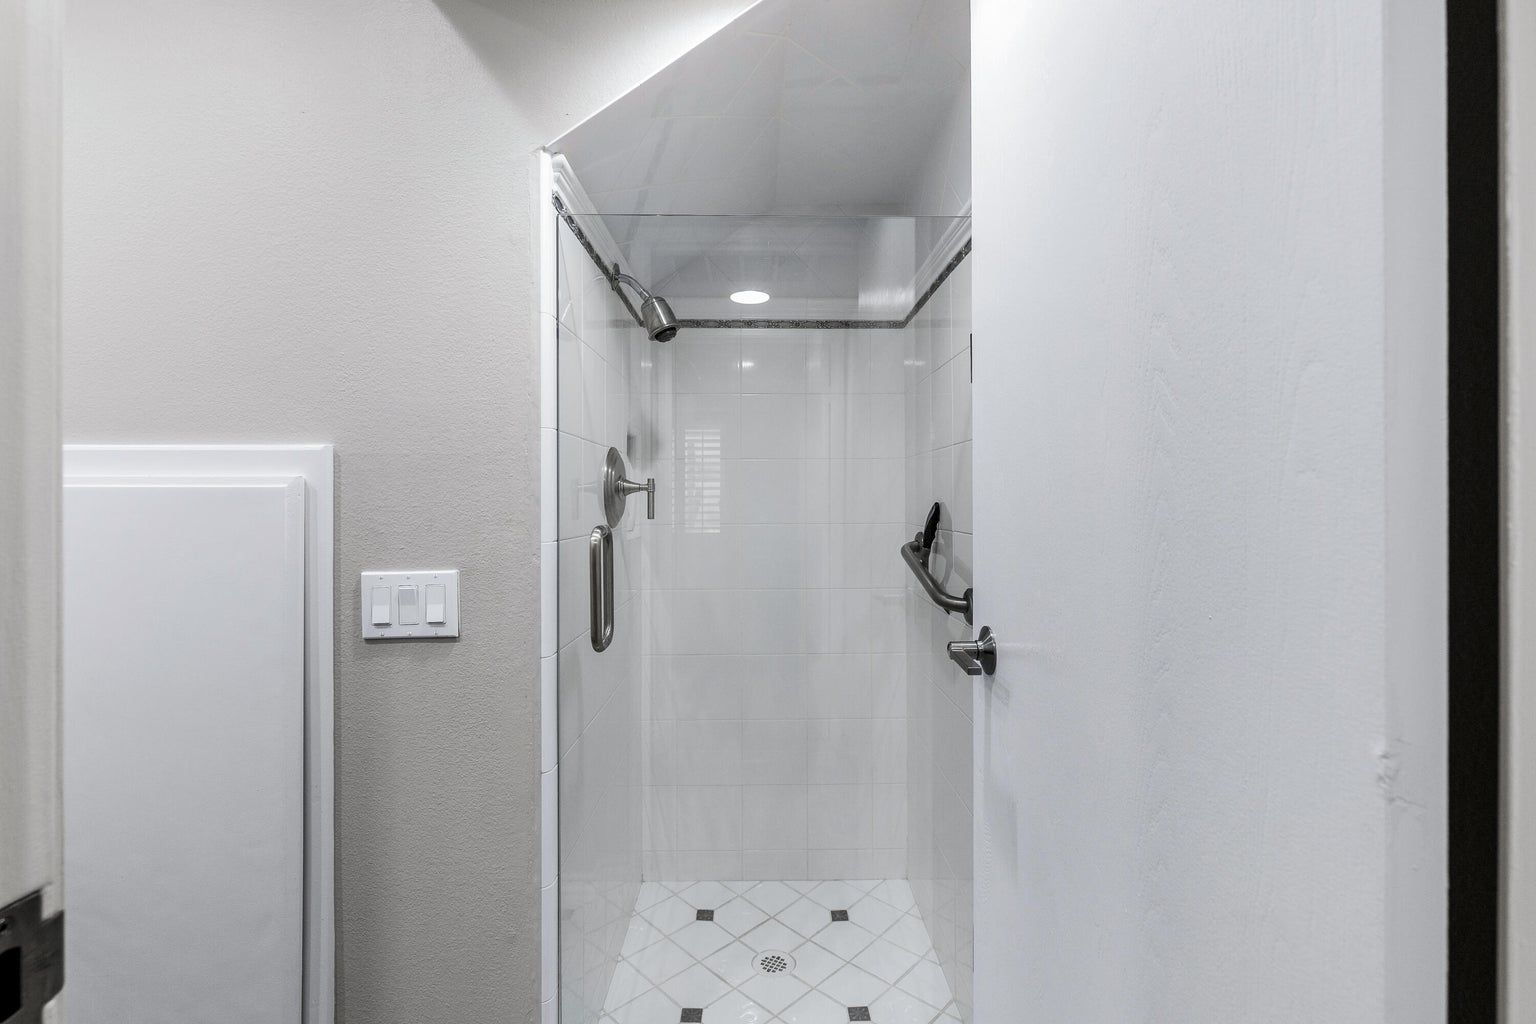 A white shower stall with tiled floor and walls.